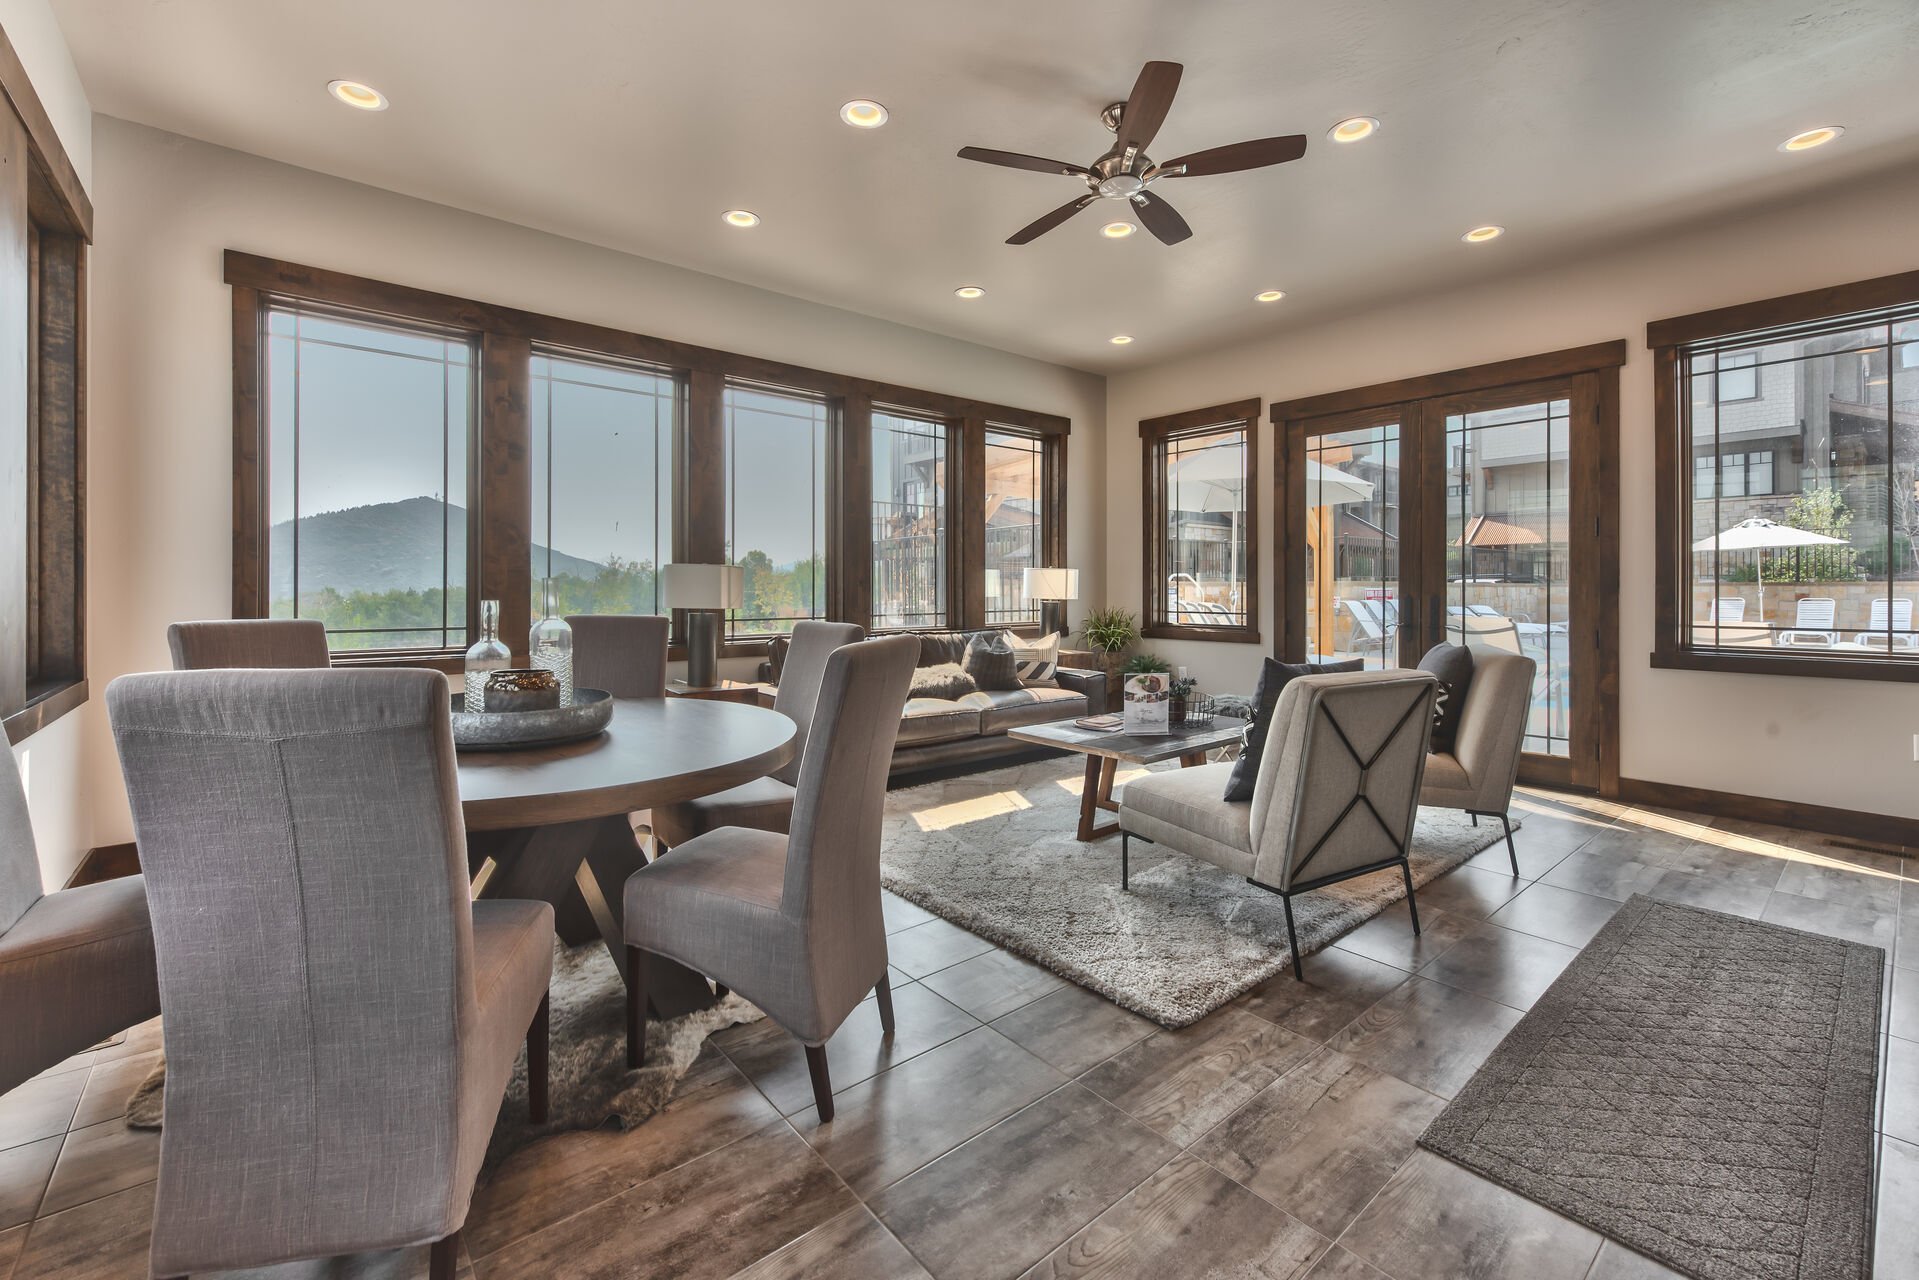 Blackstone Clubhouse with Seating Area, Wet Bar and Bathroom